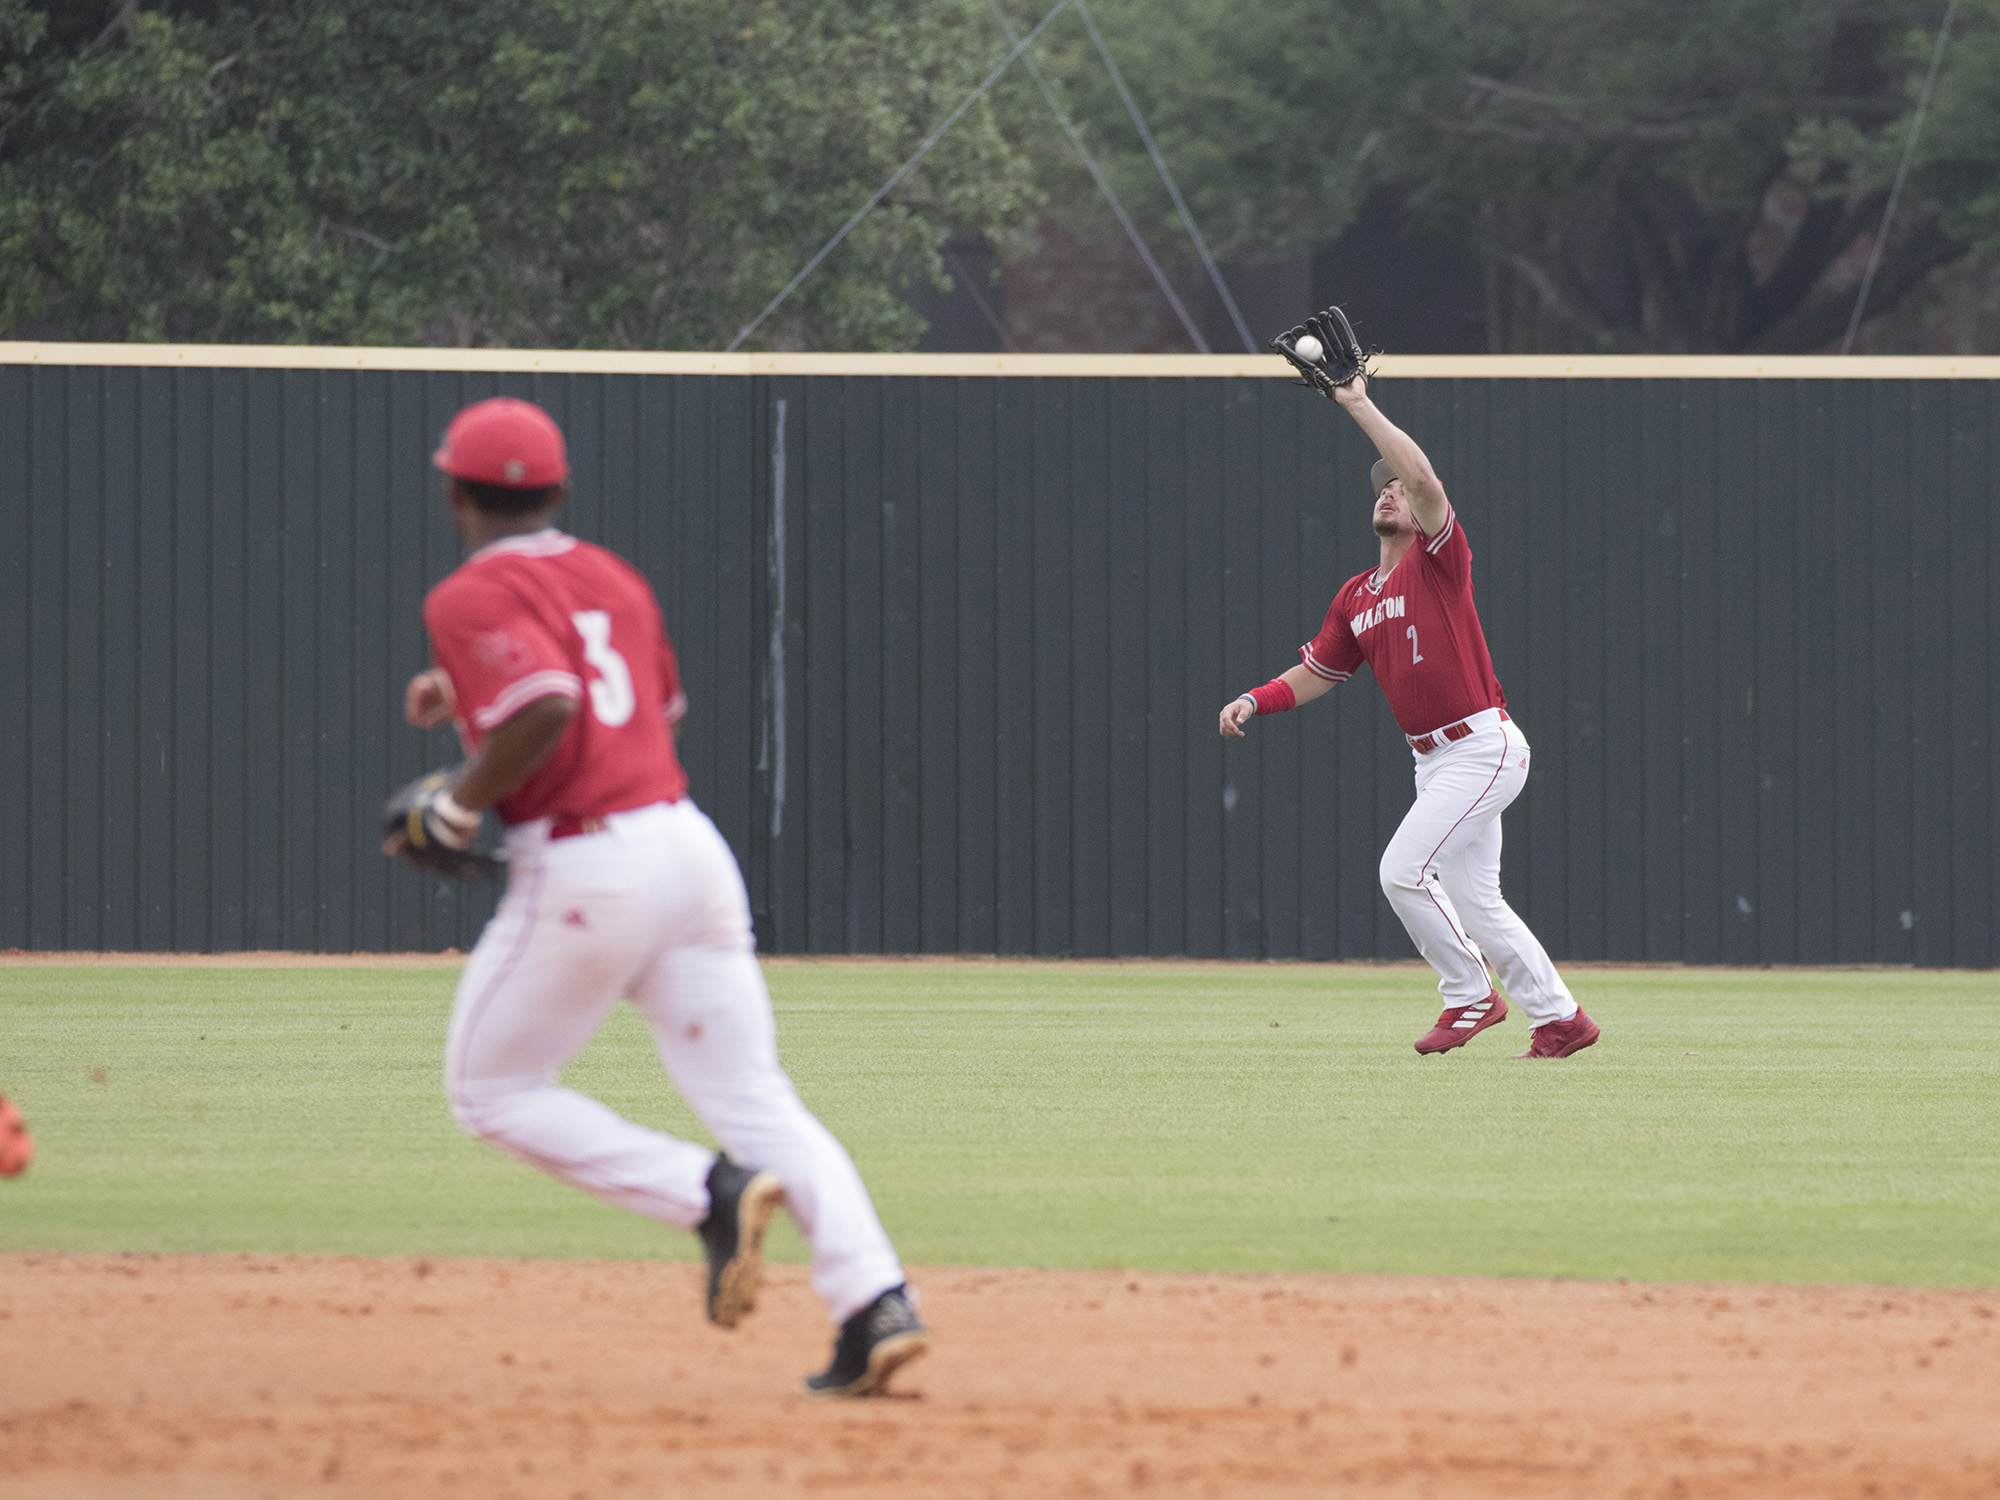 Take your game to the next level and try out for the WCJC Pioneer Baseball Team!